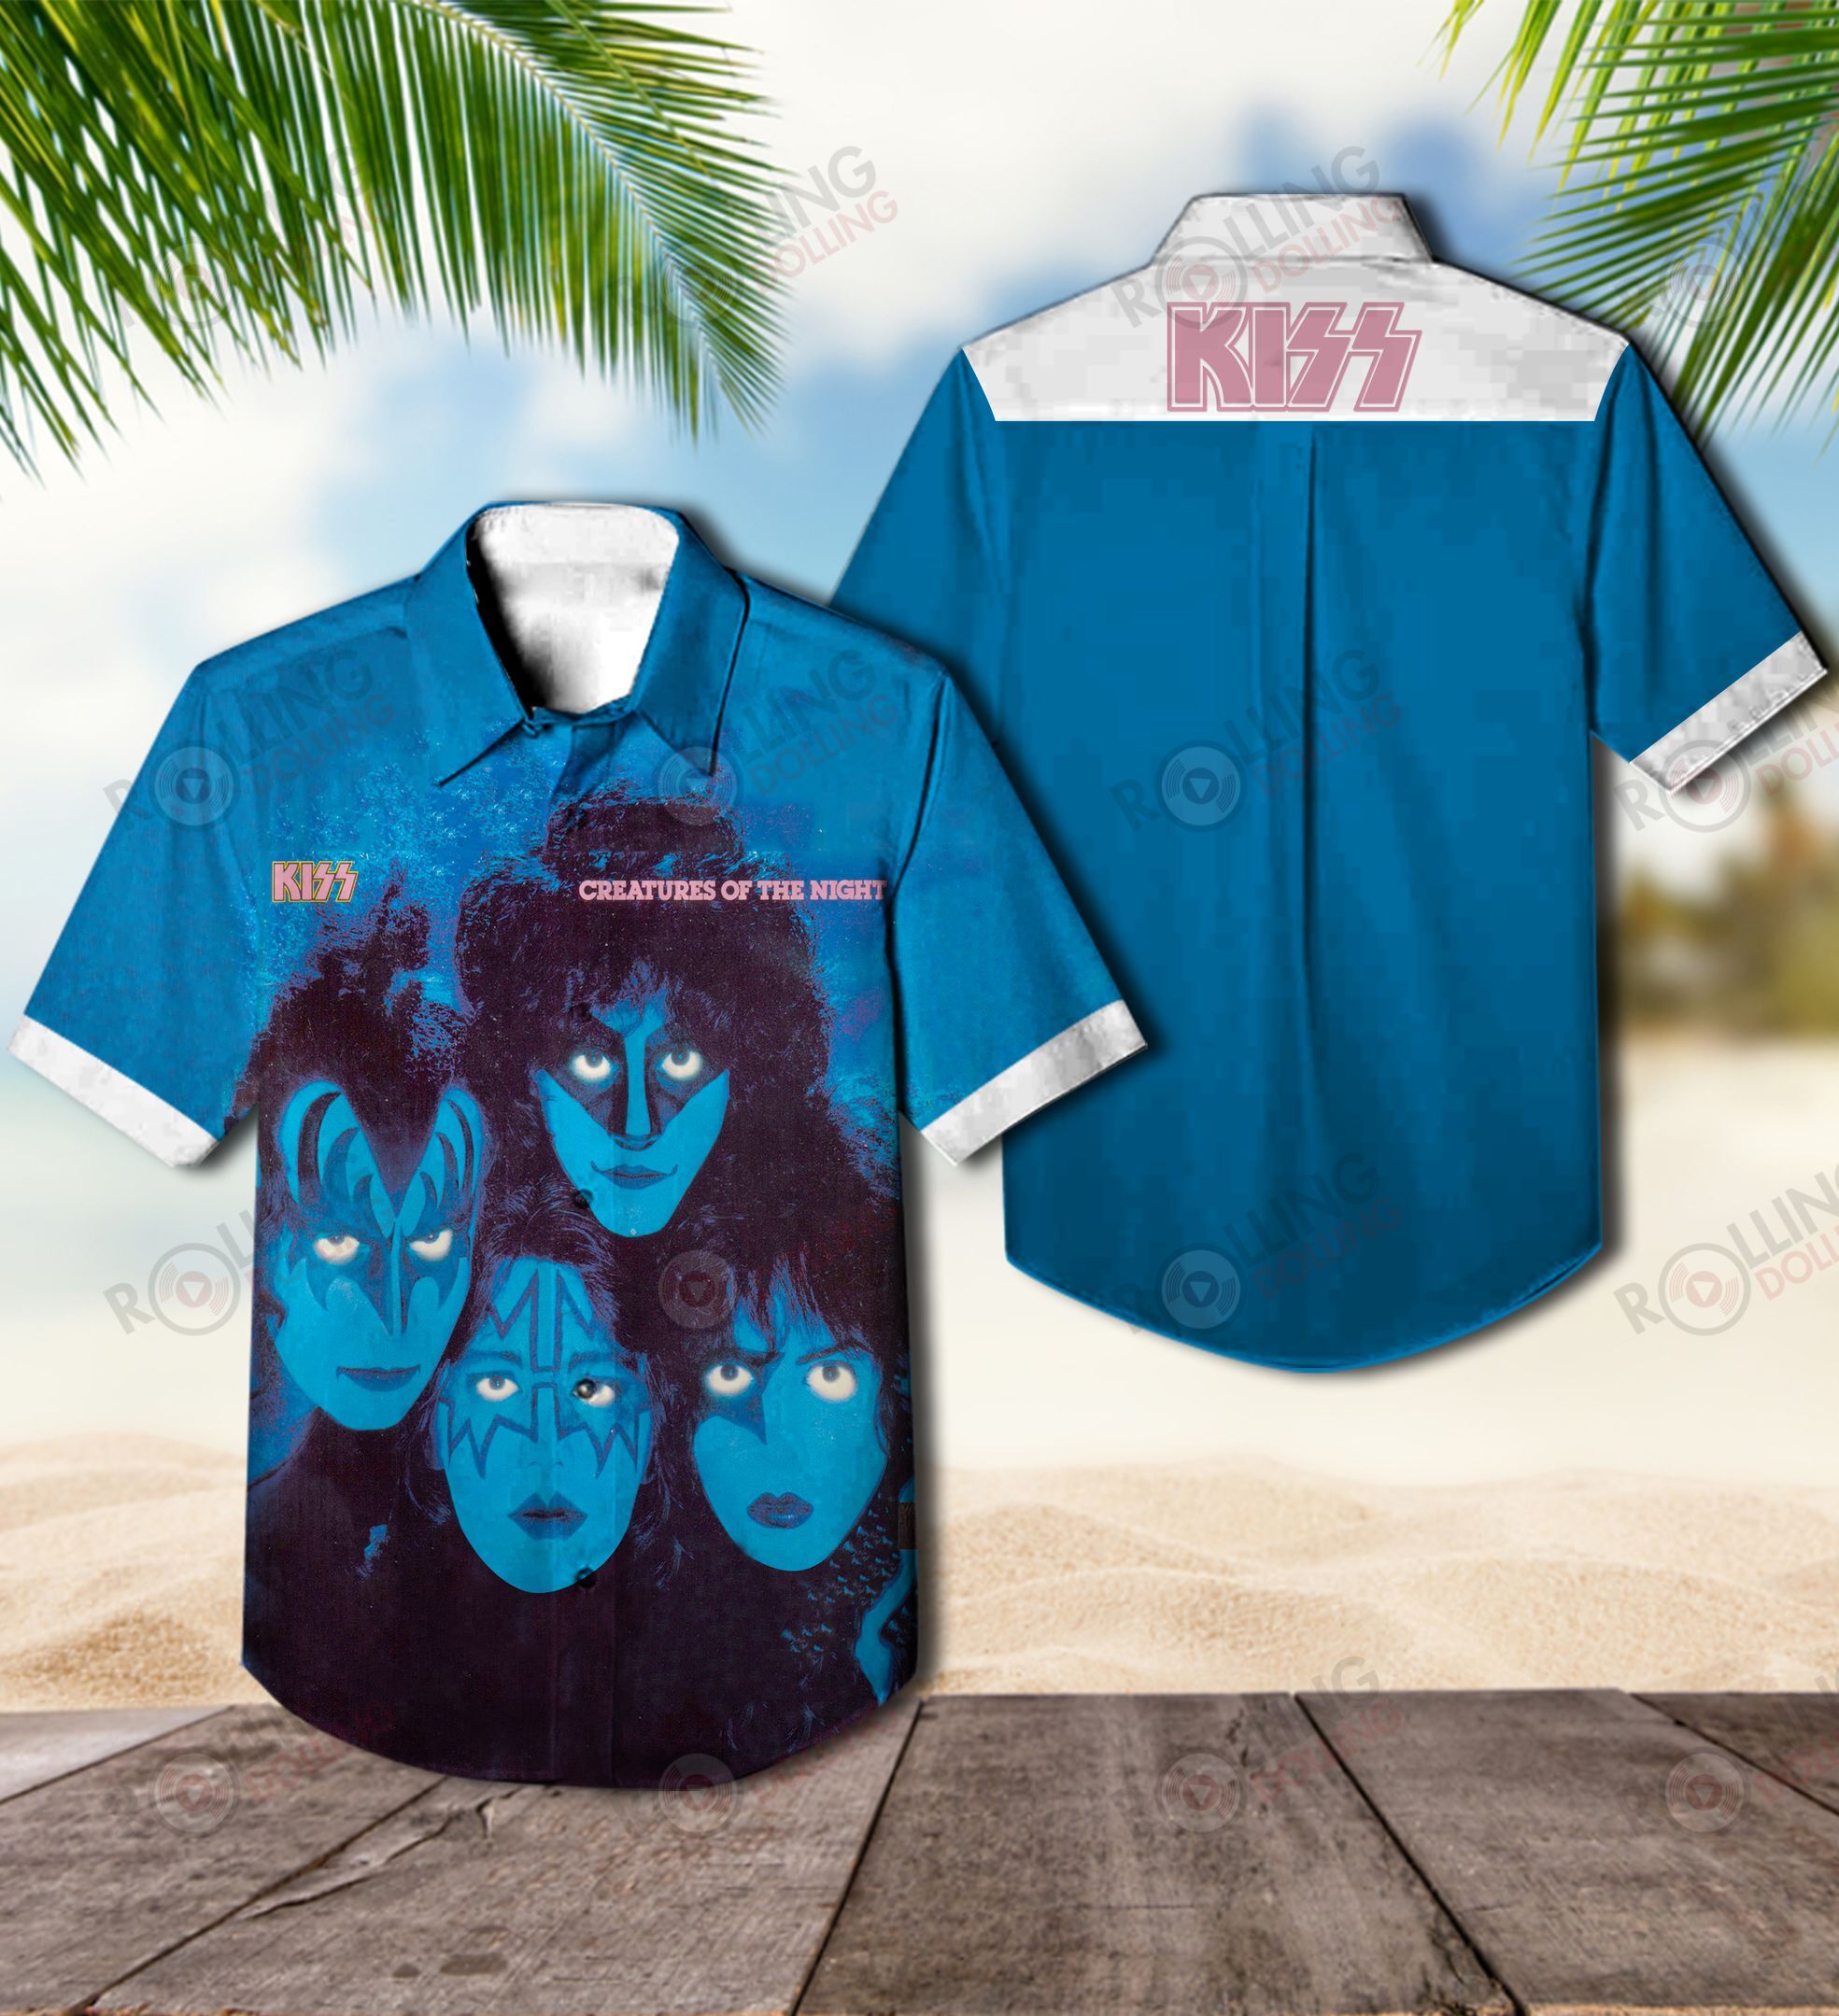 This would make a great gift for any fan who loves Hawaiian Shirt as well as Rock band 74